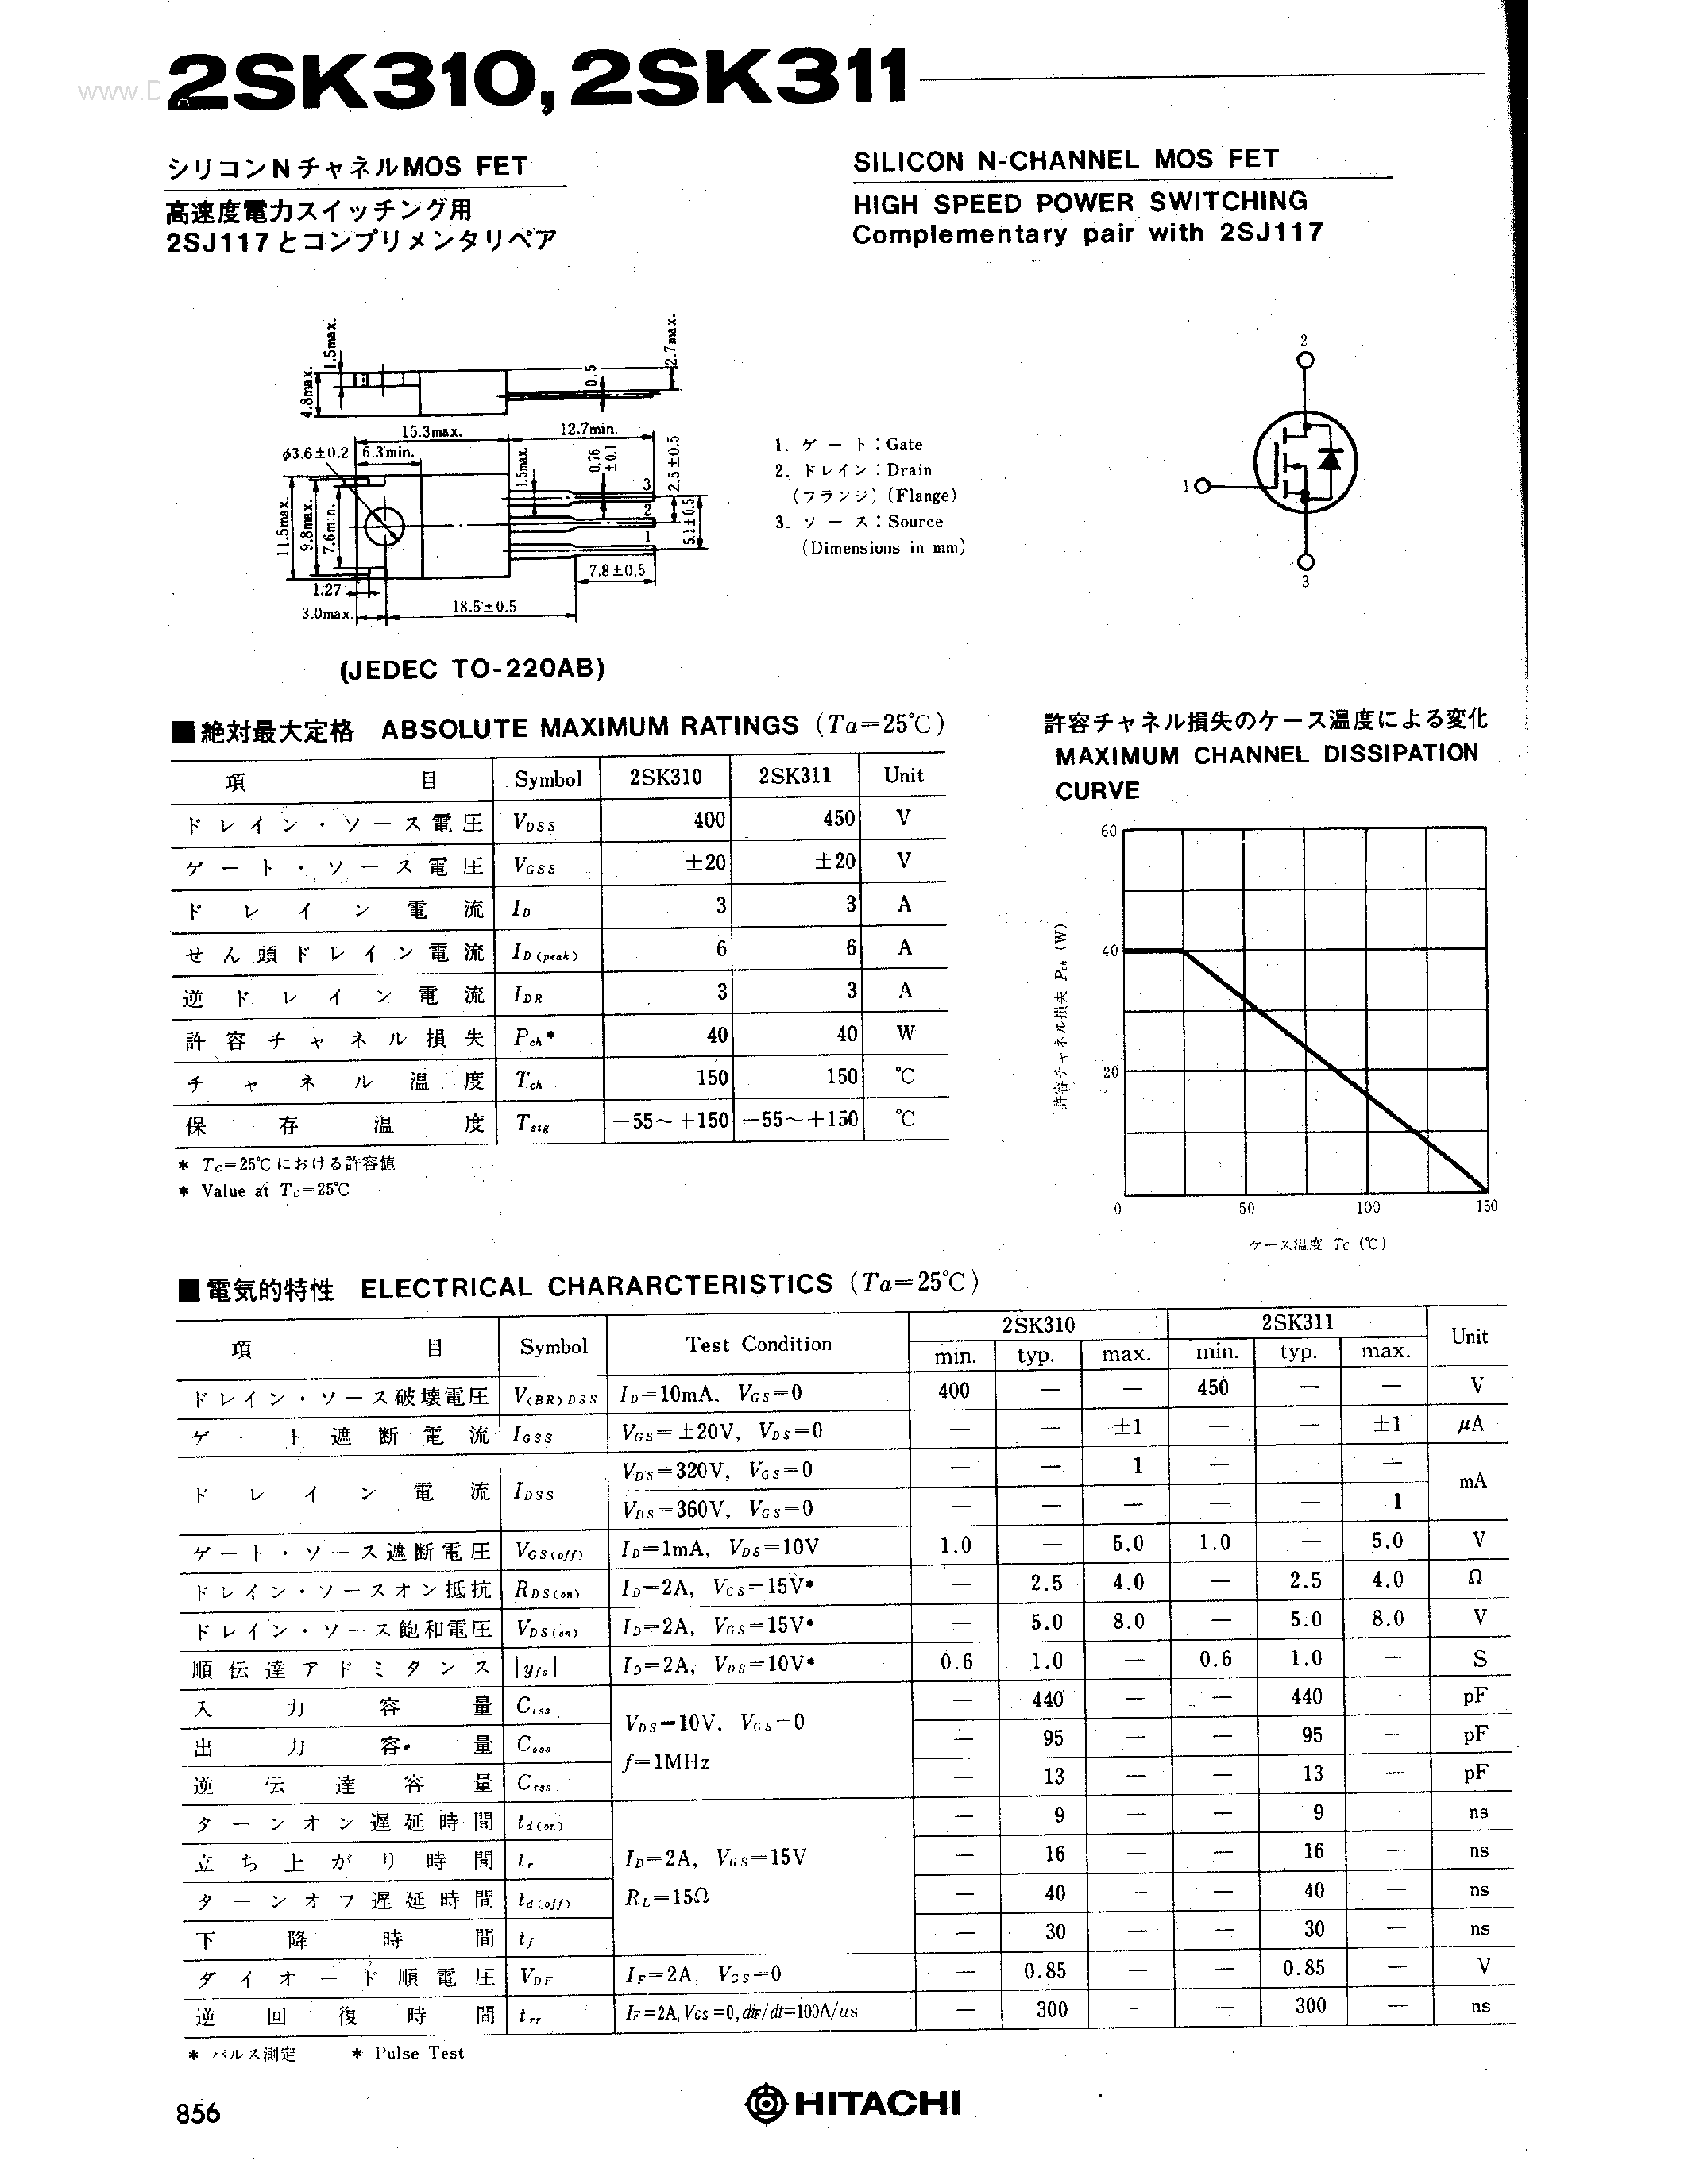 Datasheet 2SK310 - (2SK310 / 2SK311) SILICON N-CHANNEL MOS FET page 1